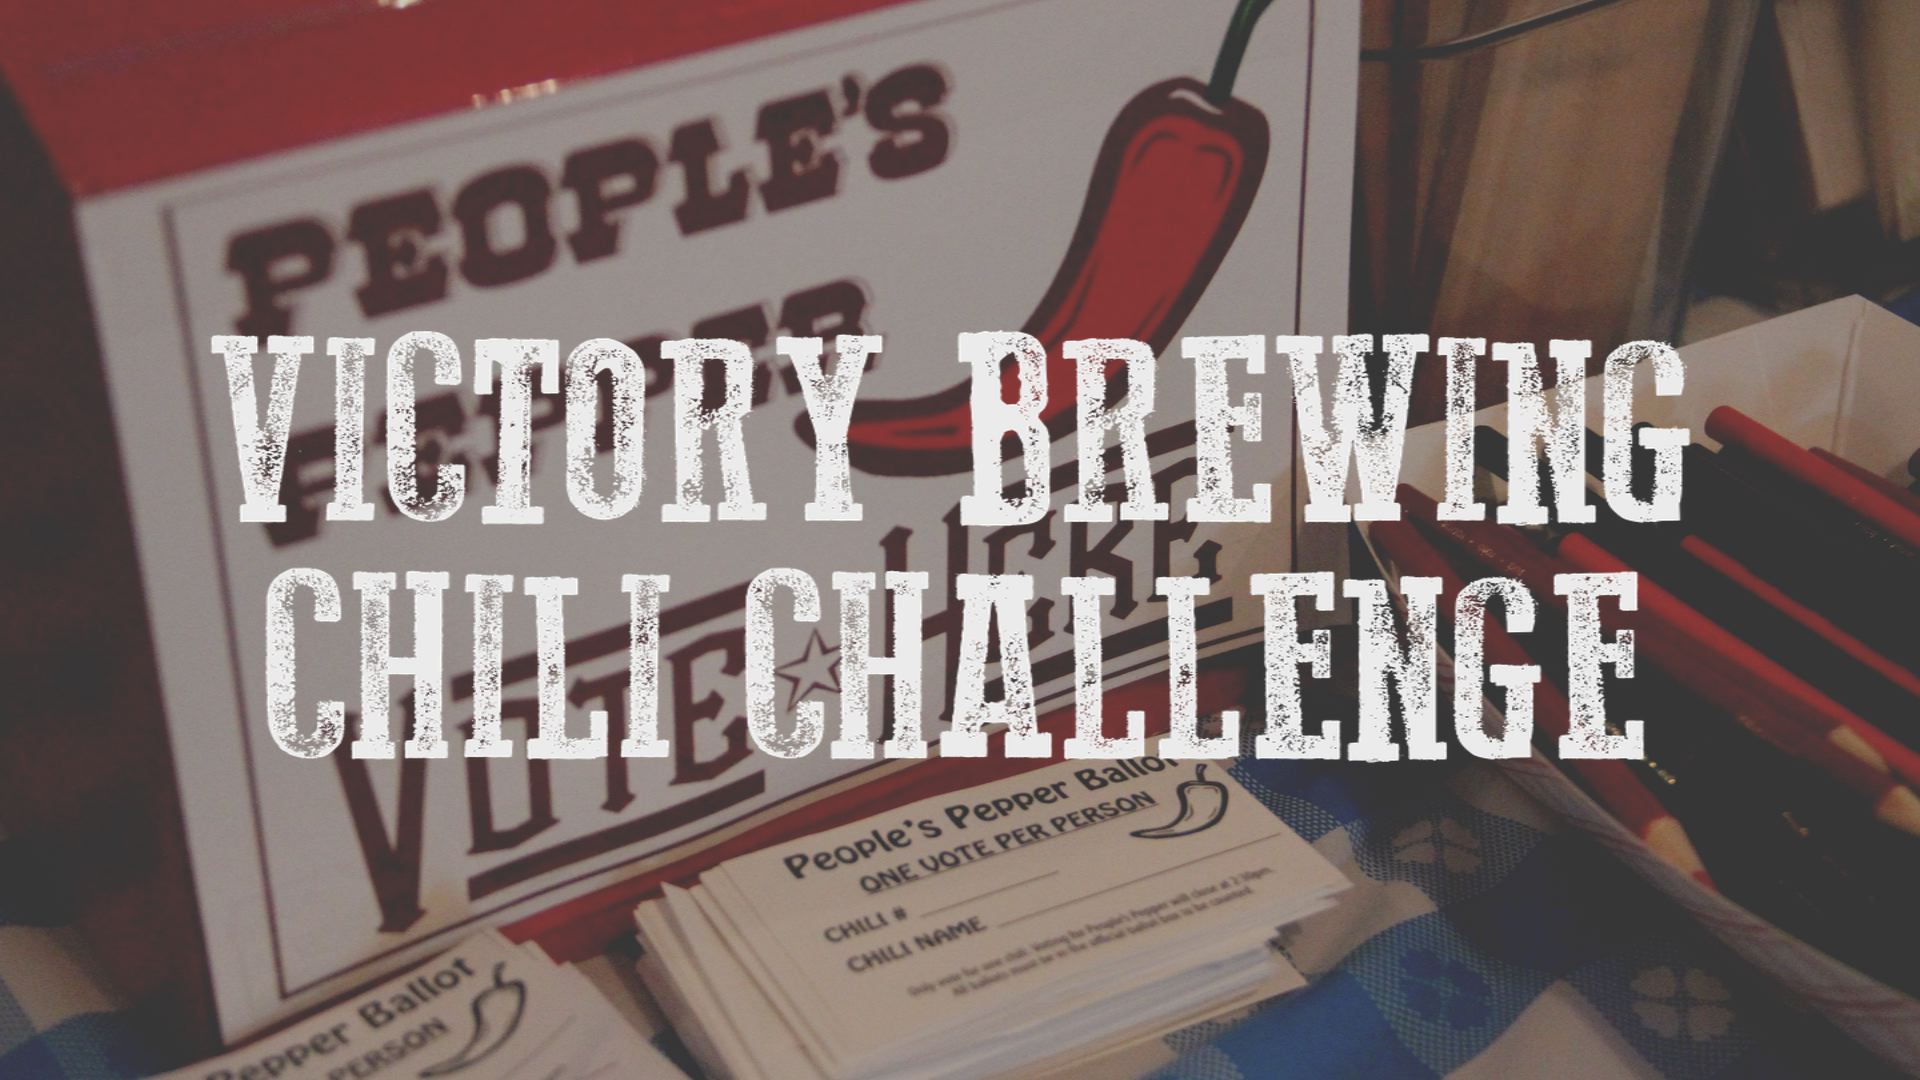 VICTORY BREWING CHILI CHALLENGE BLOG